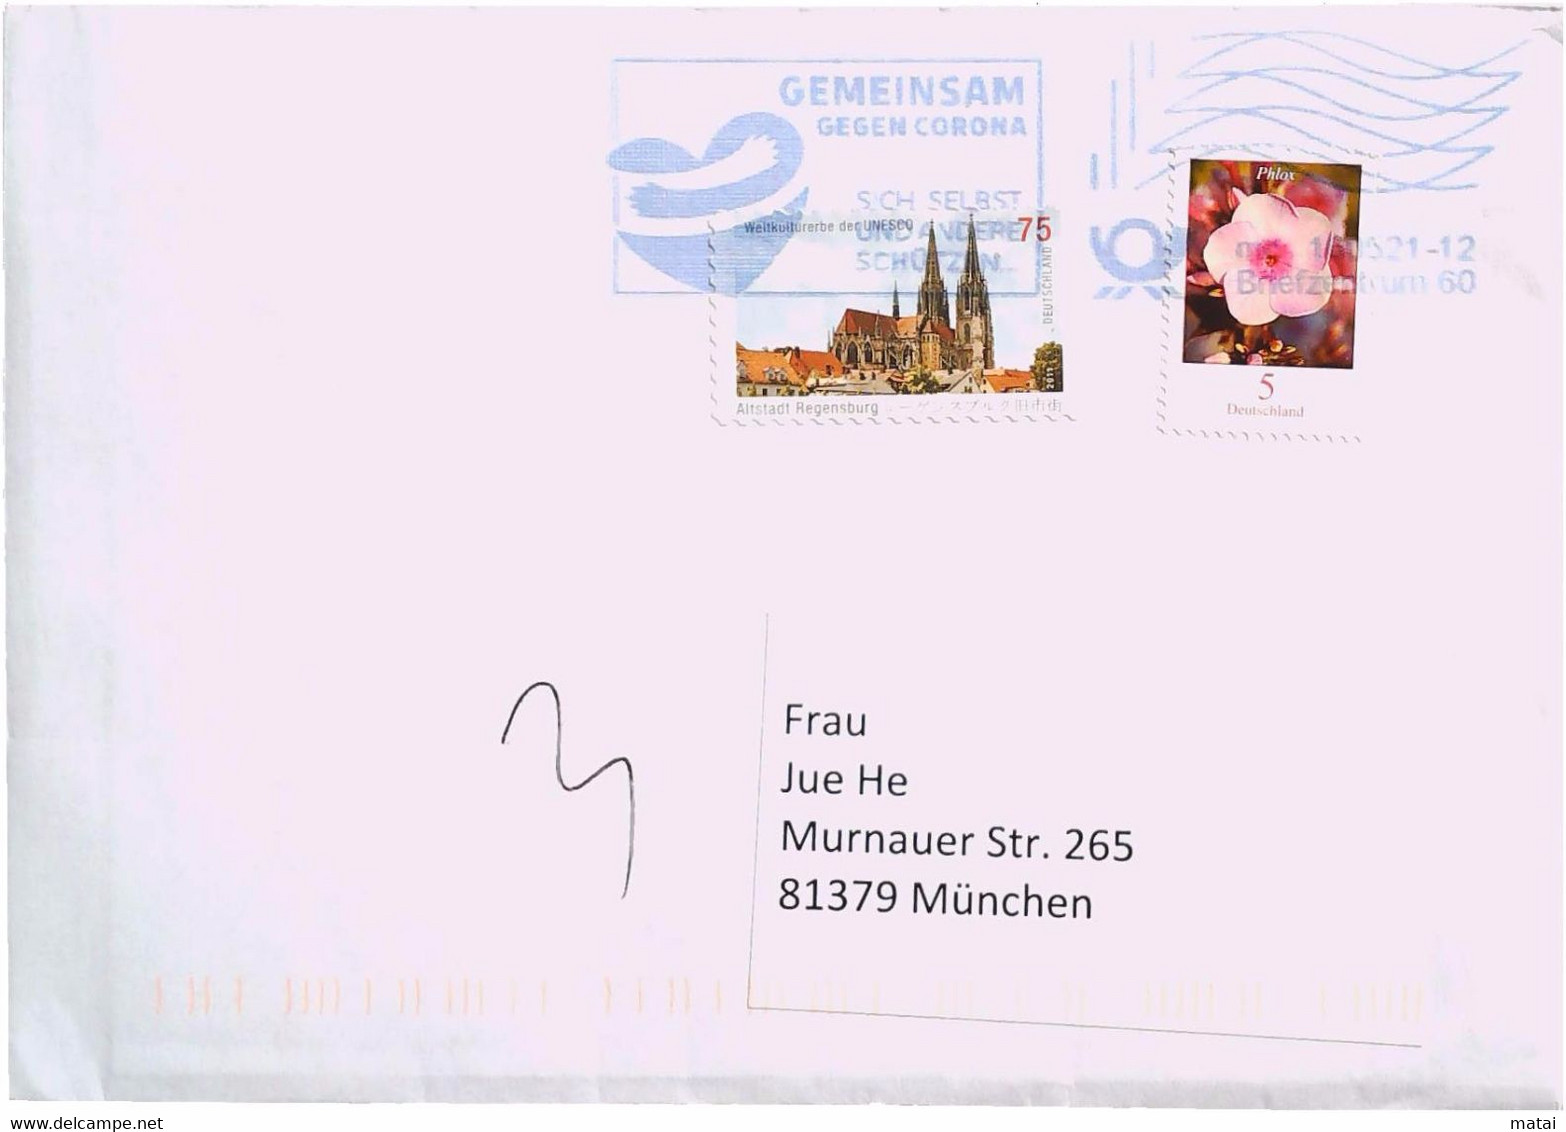 GERMANY COVER WITH  ANTI COVID-19 INFORMATION POSTMARK - Cartas & Documentos